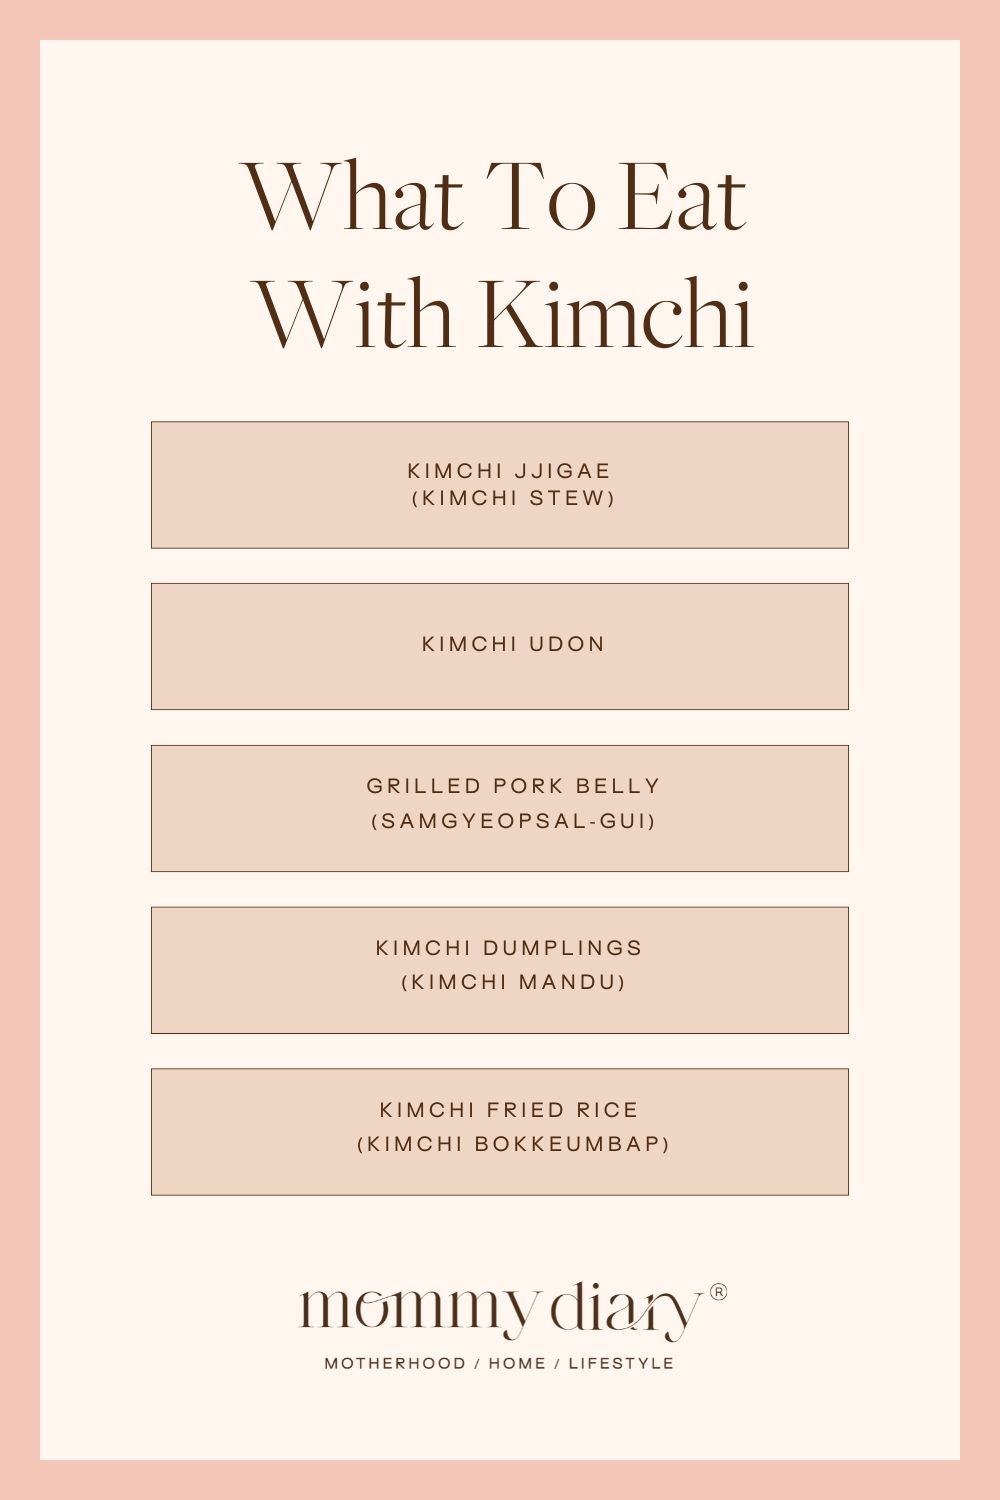 What To Eat With Kimchi